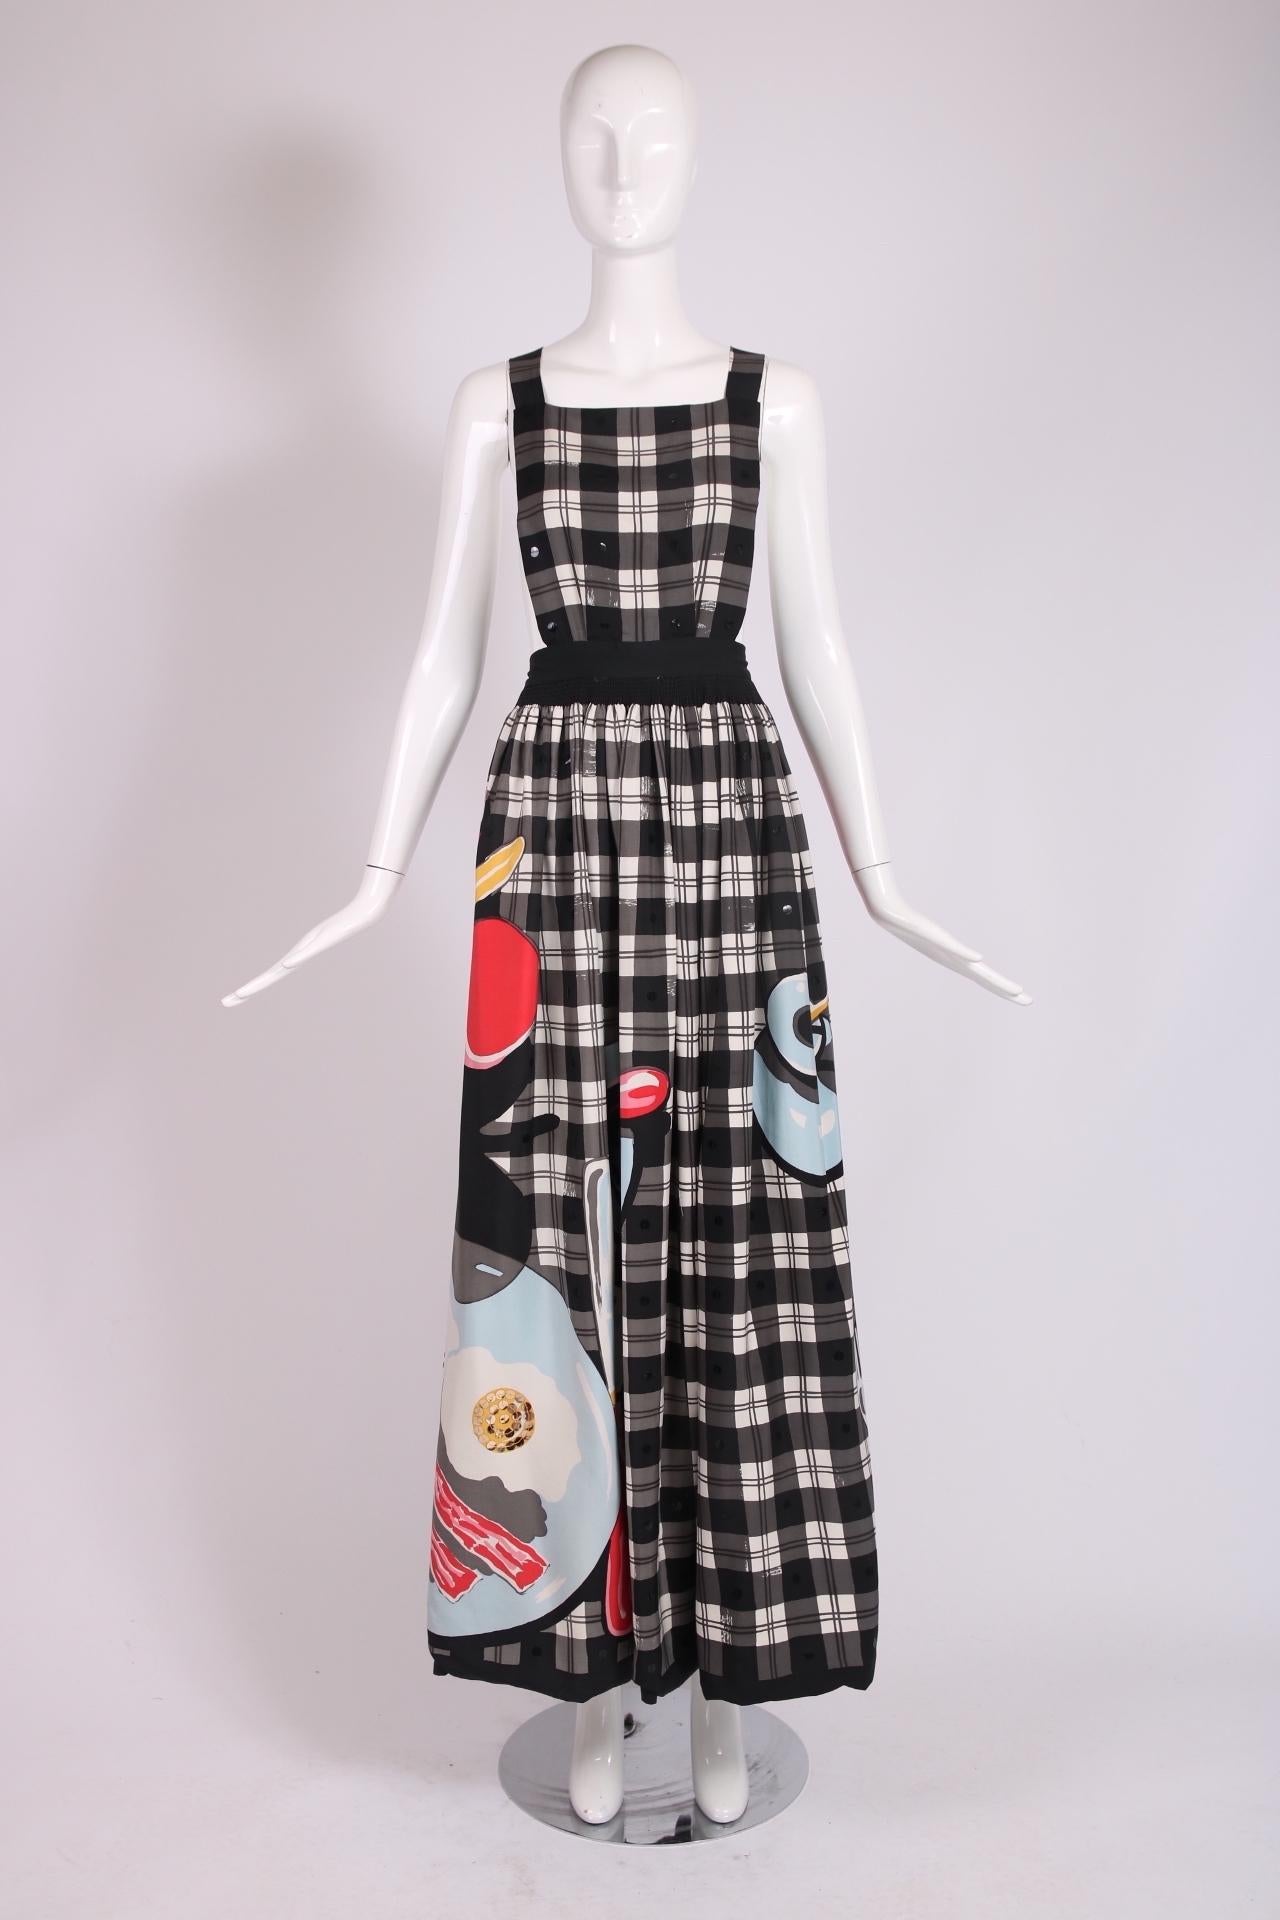 1982 S/S Michaele Vollbracht iconic black plaid on white pinafore dress featuring a breakfast scene replete with bacon and eggs w/yellow sequin yokes served on a plate, a steaming cup of coffee and silverware. Fabric tag 100% silk. Labeled size 10